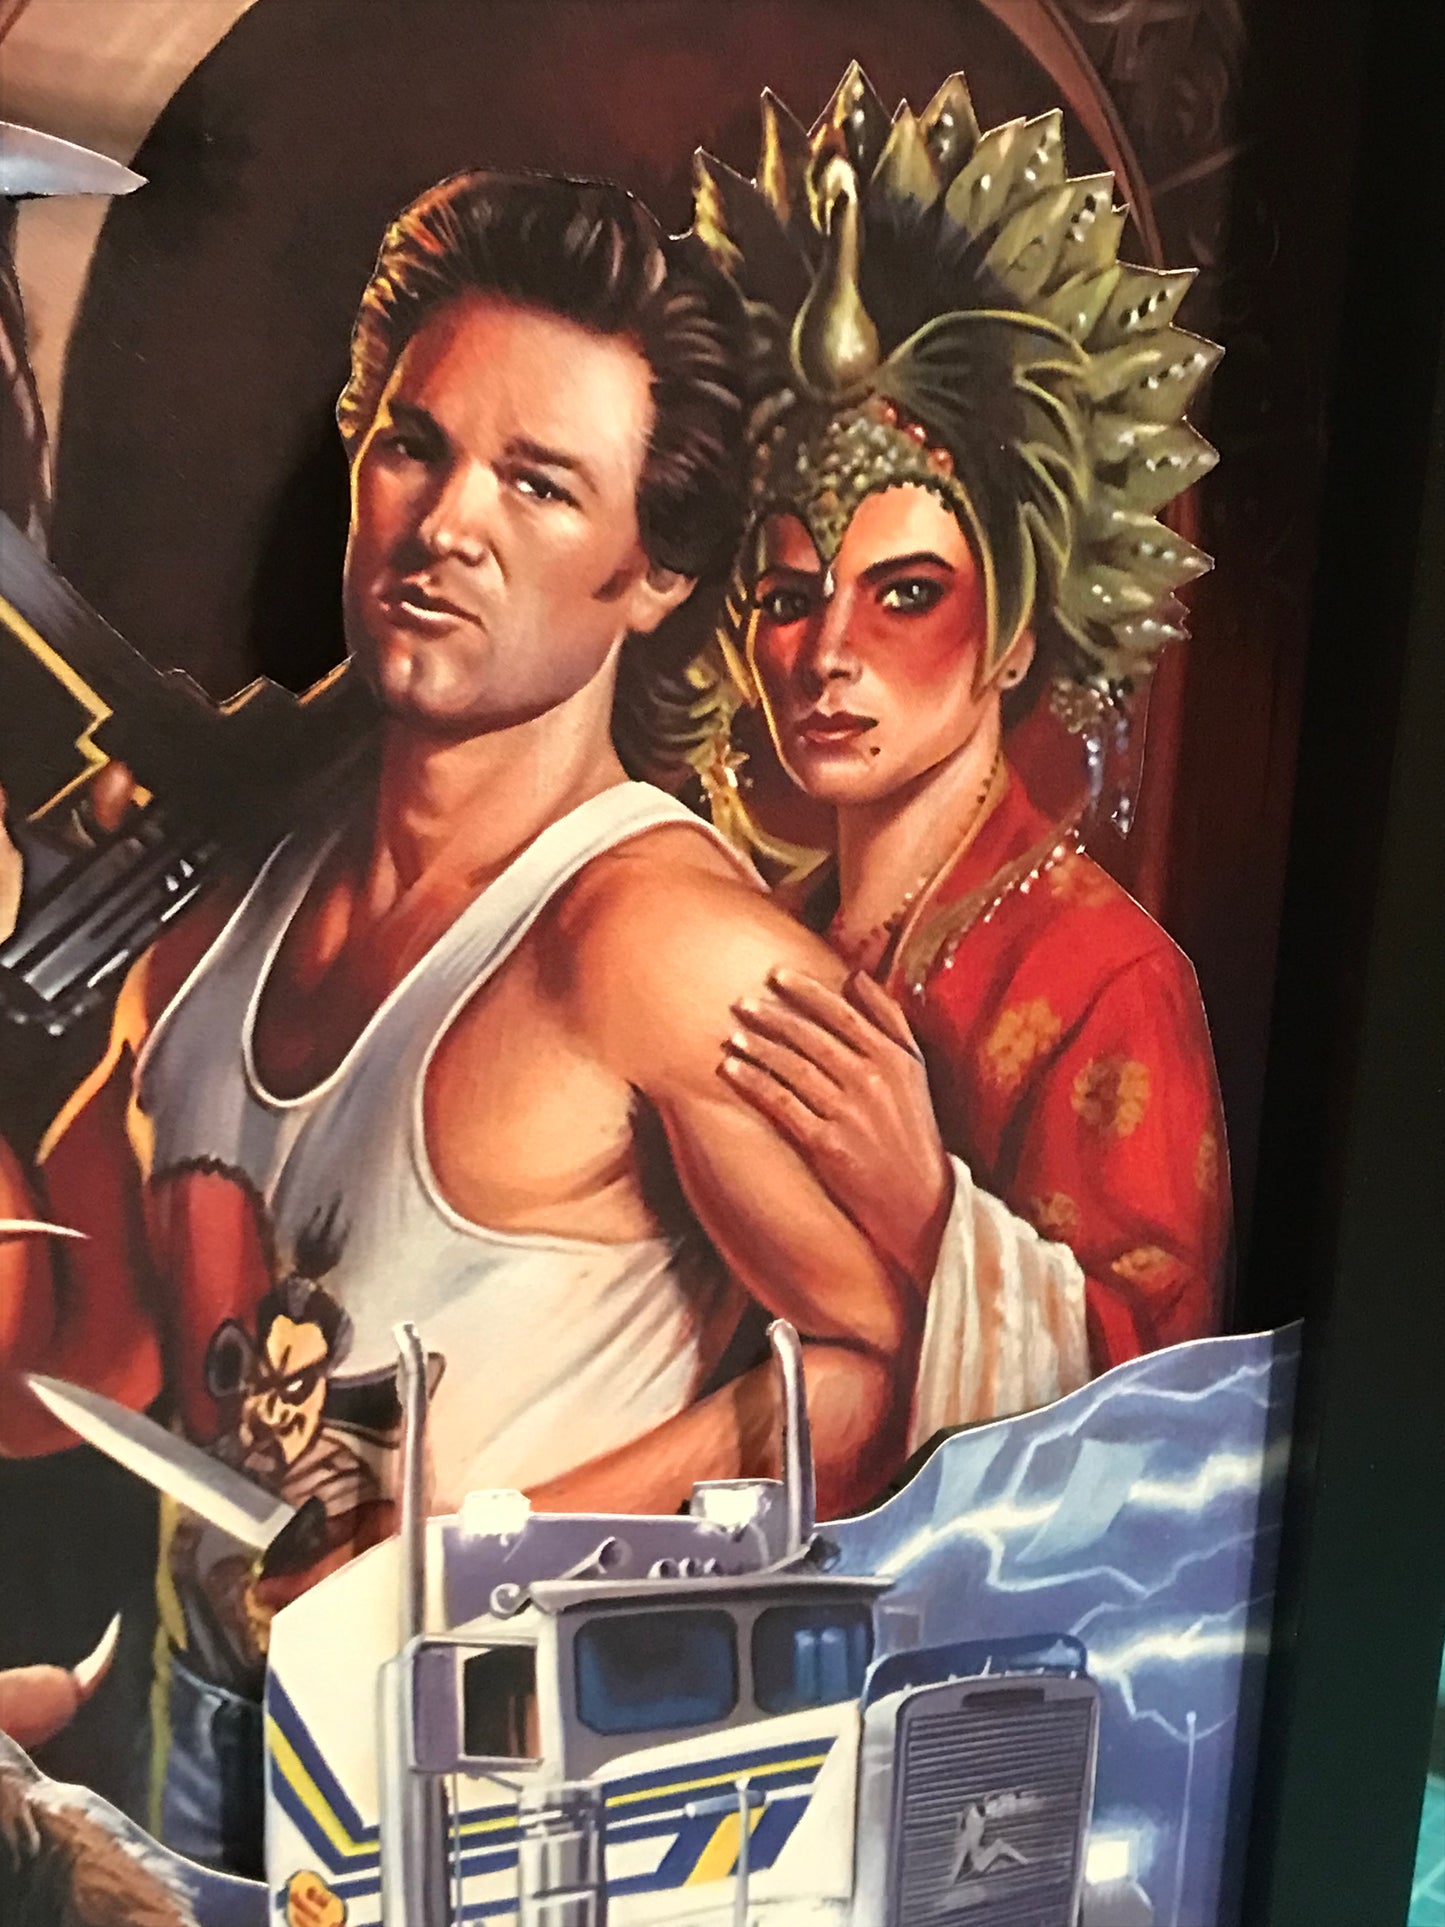 Big Trouble in Little China (11x14)